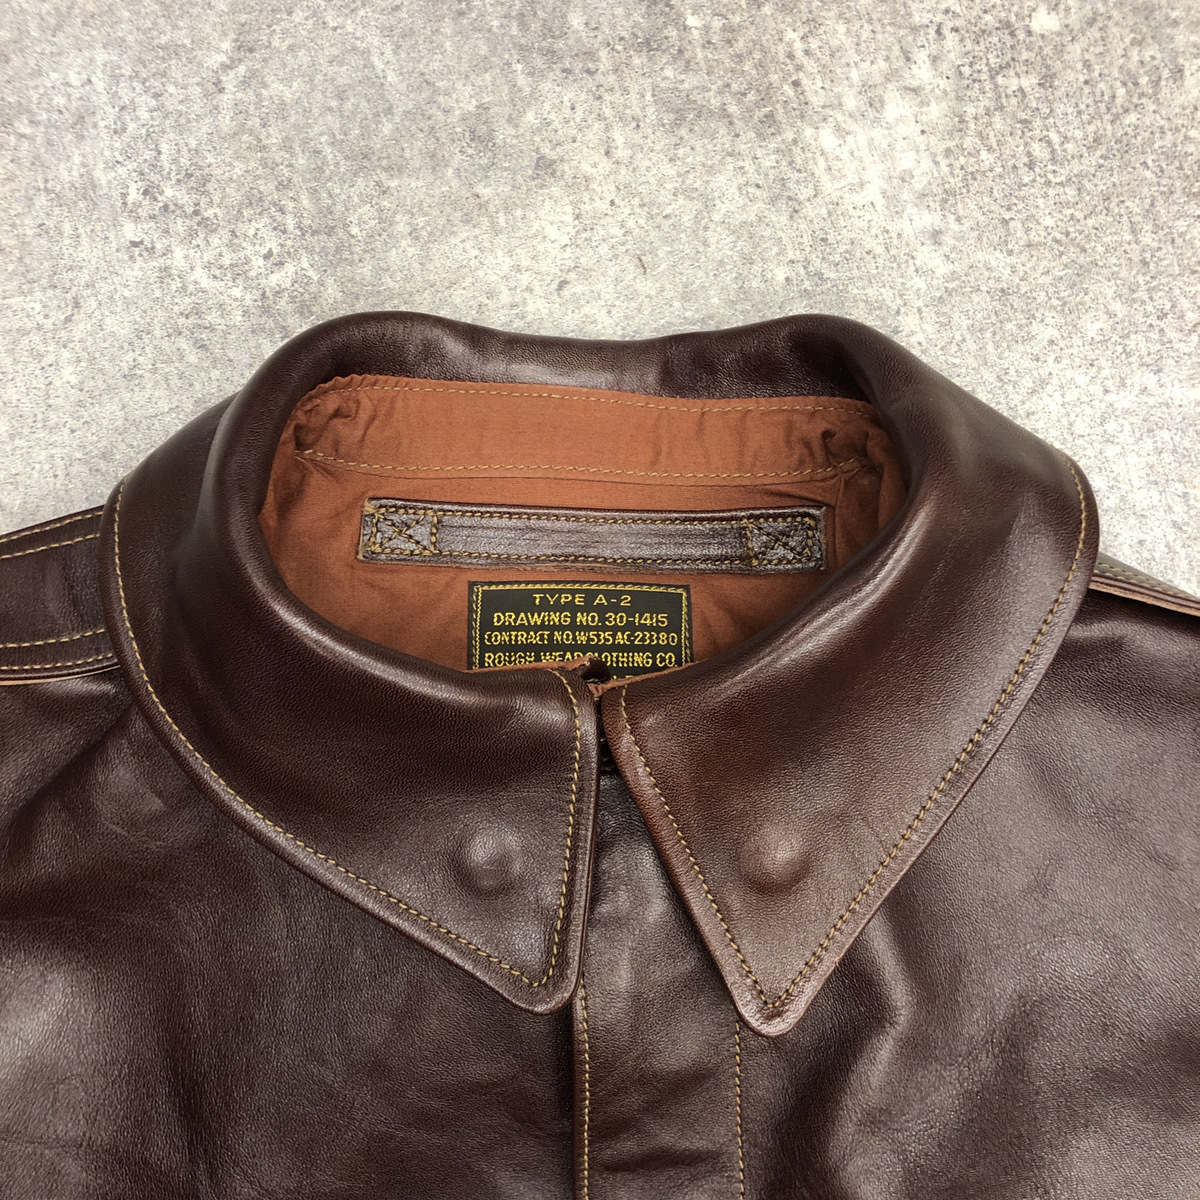 ●BUZZ RICKSON'S バズリクソンズ Type A-2 POUGHKEEPSIE LEATHER COAT CO,INC ミリタリー フライト ジャケット レザー 馬革 30-1415 104_画像5